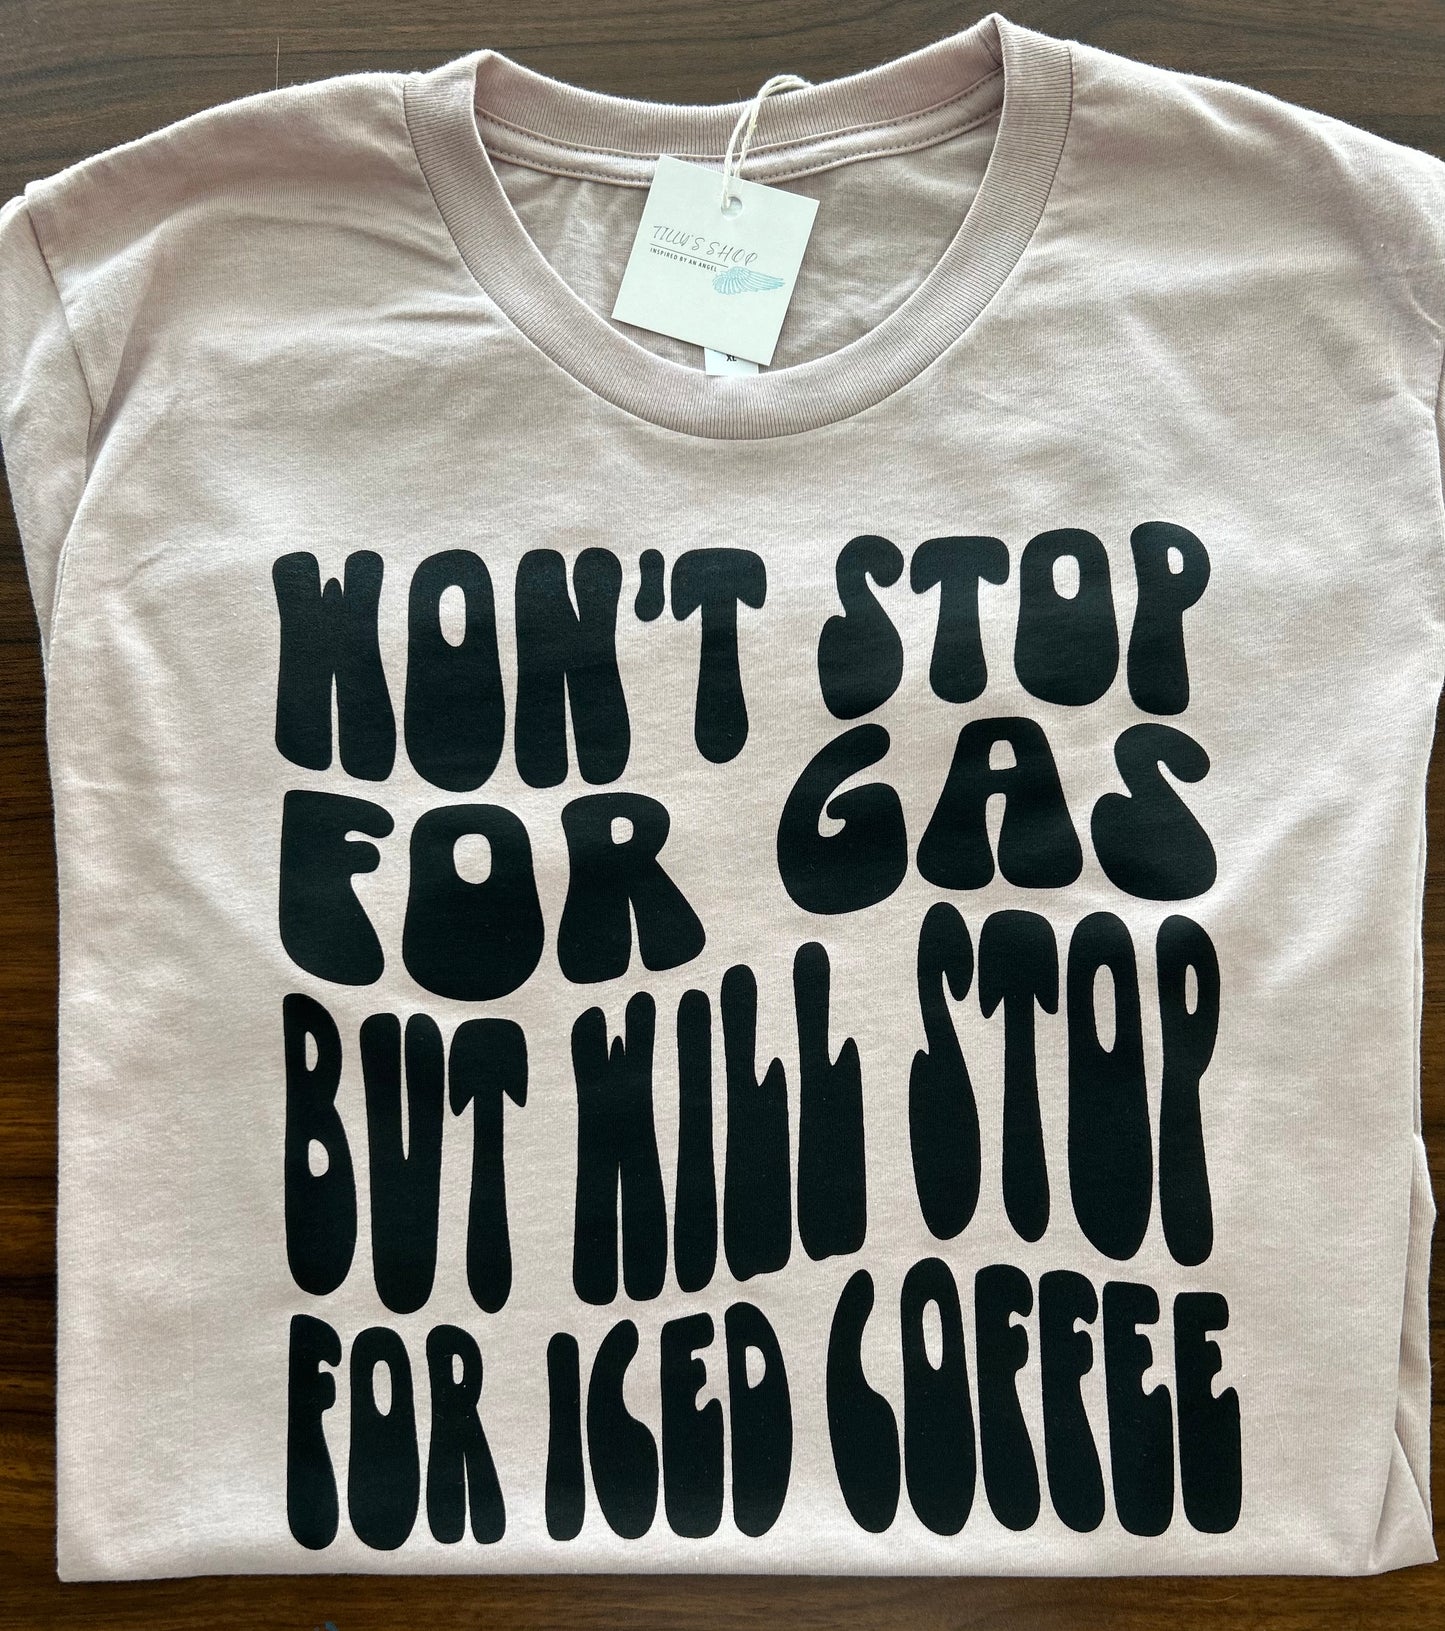 “I wont stop for Gas” T-Shirt